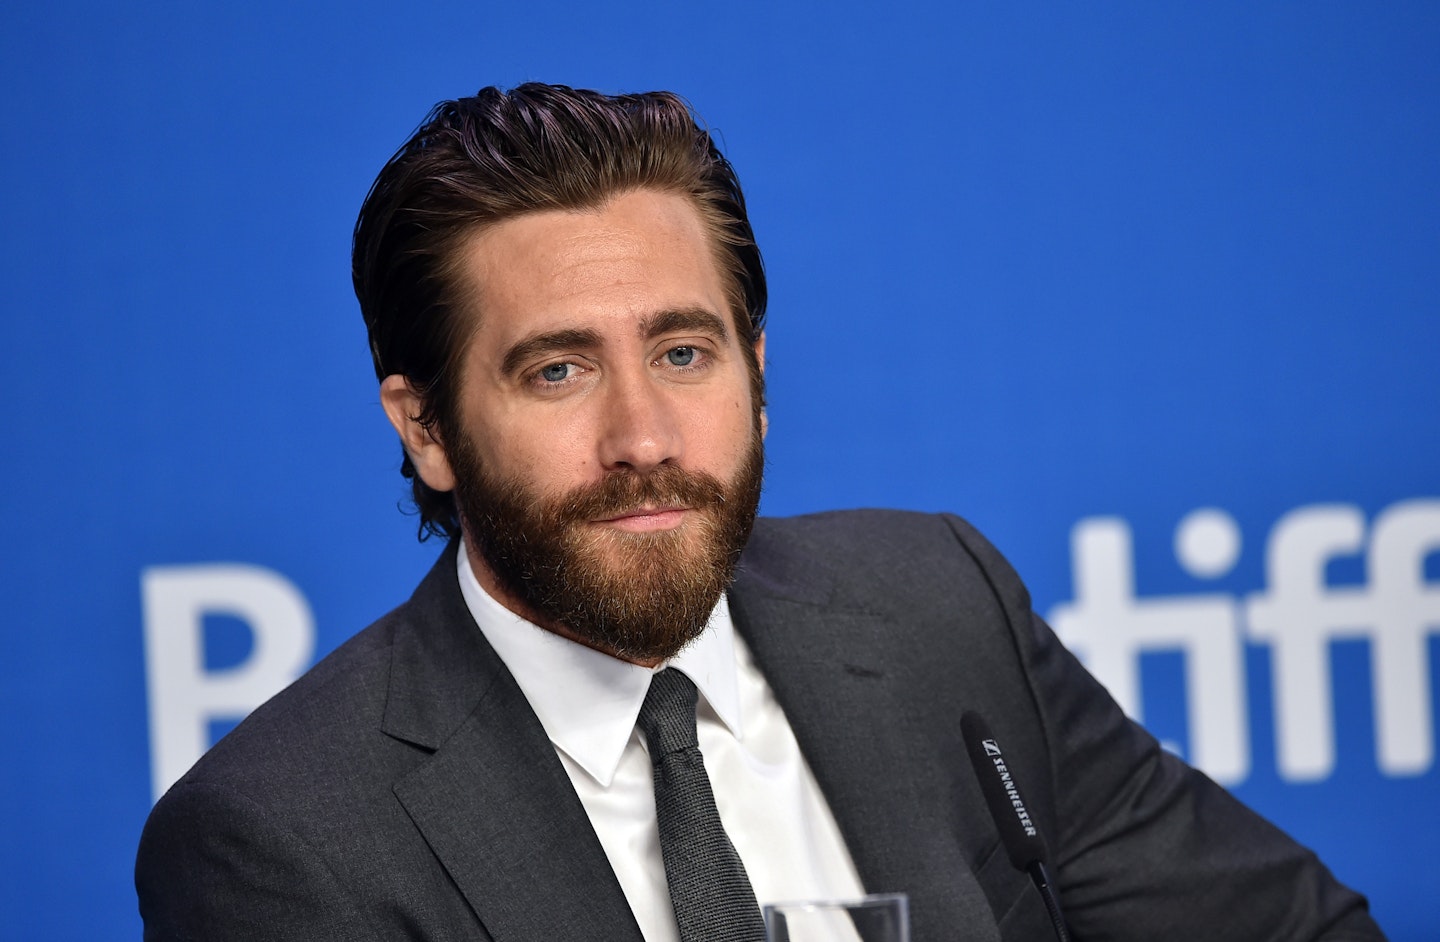 Movie review: As “Prince of Persia,” Gyllenhaal's just Jake – The